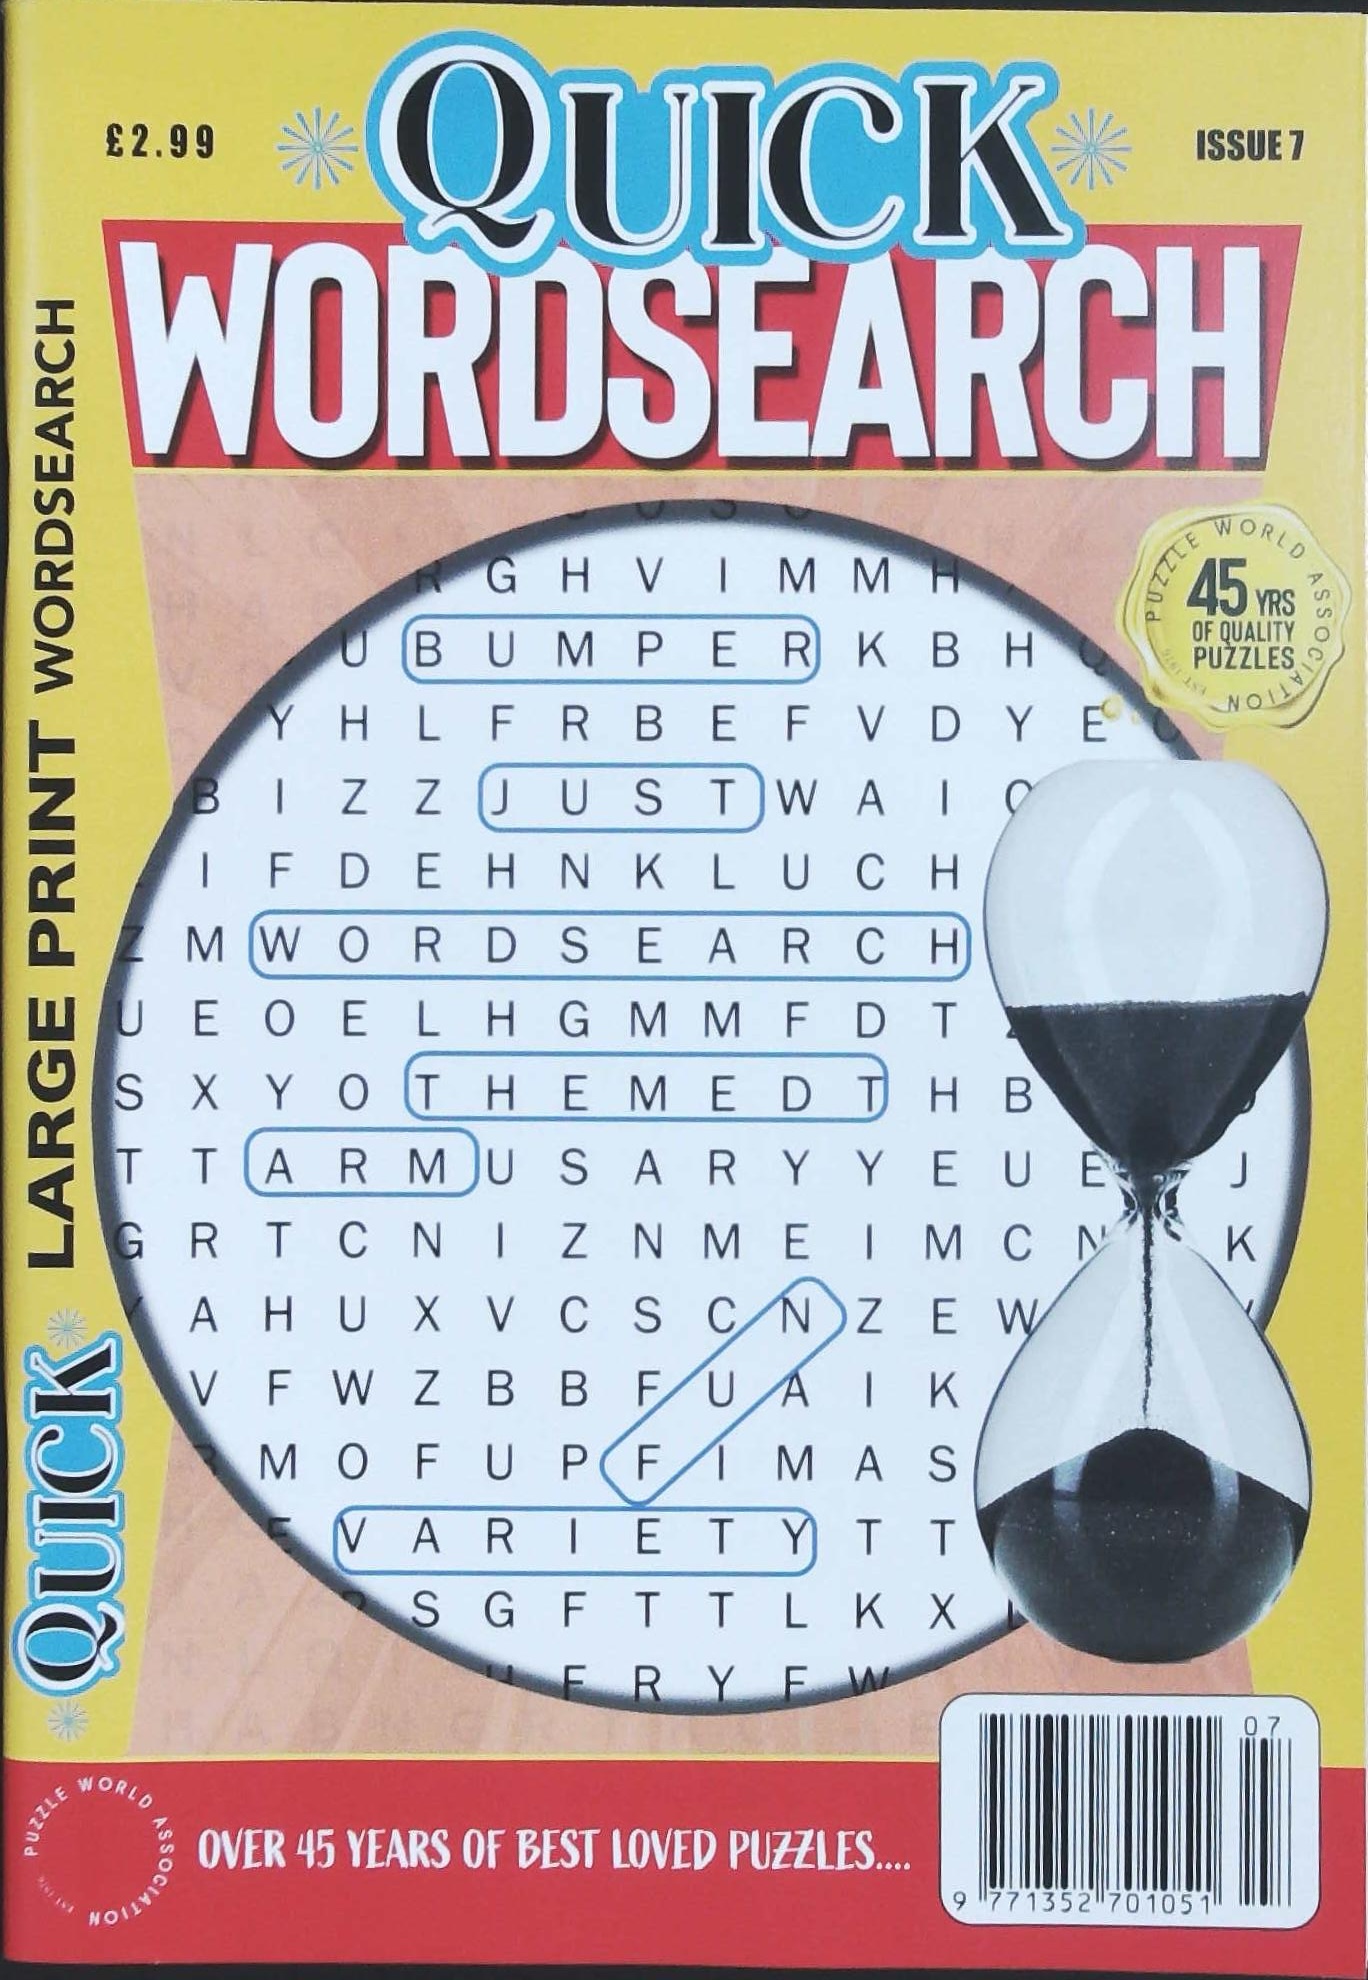 QUICK WORDSEARCH